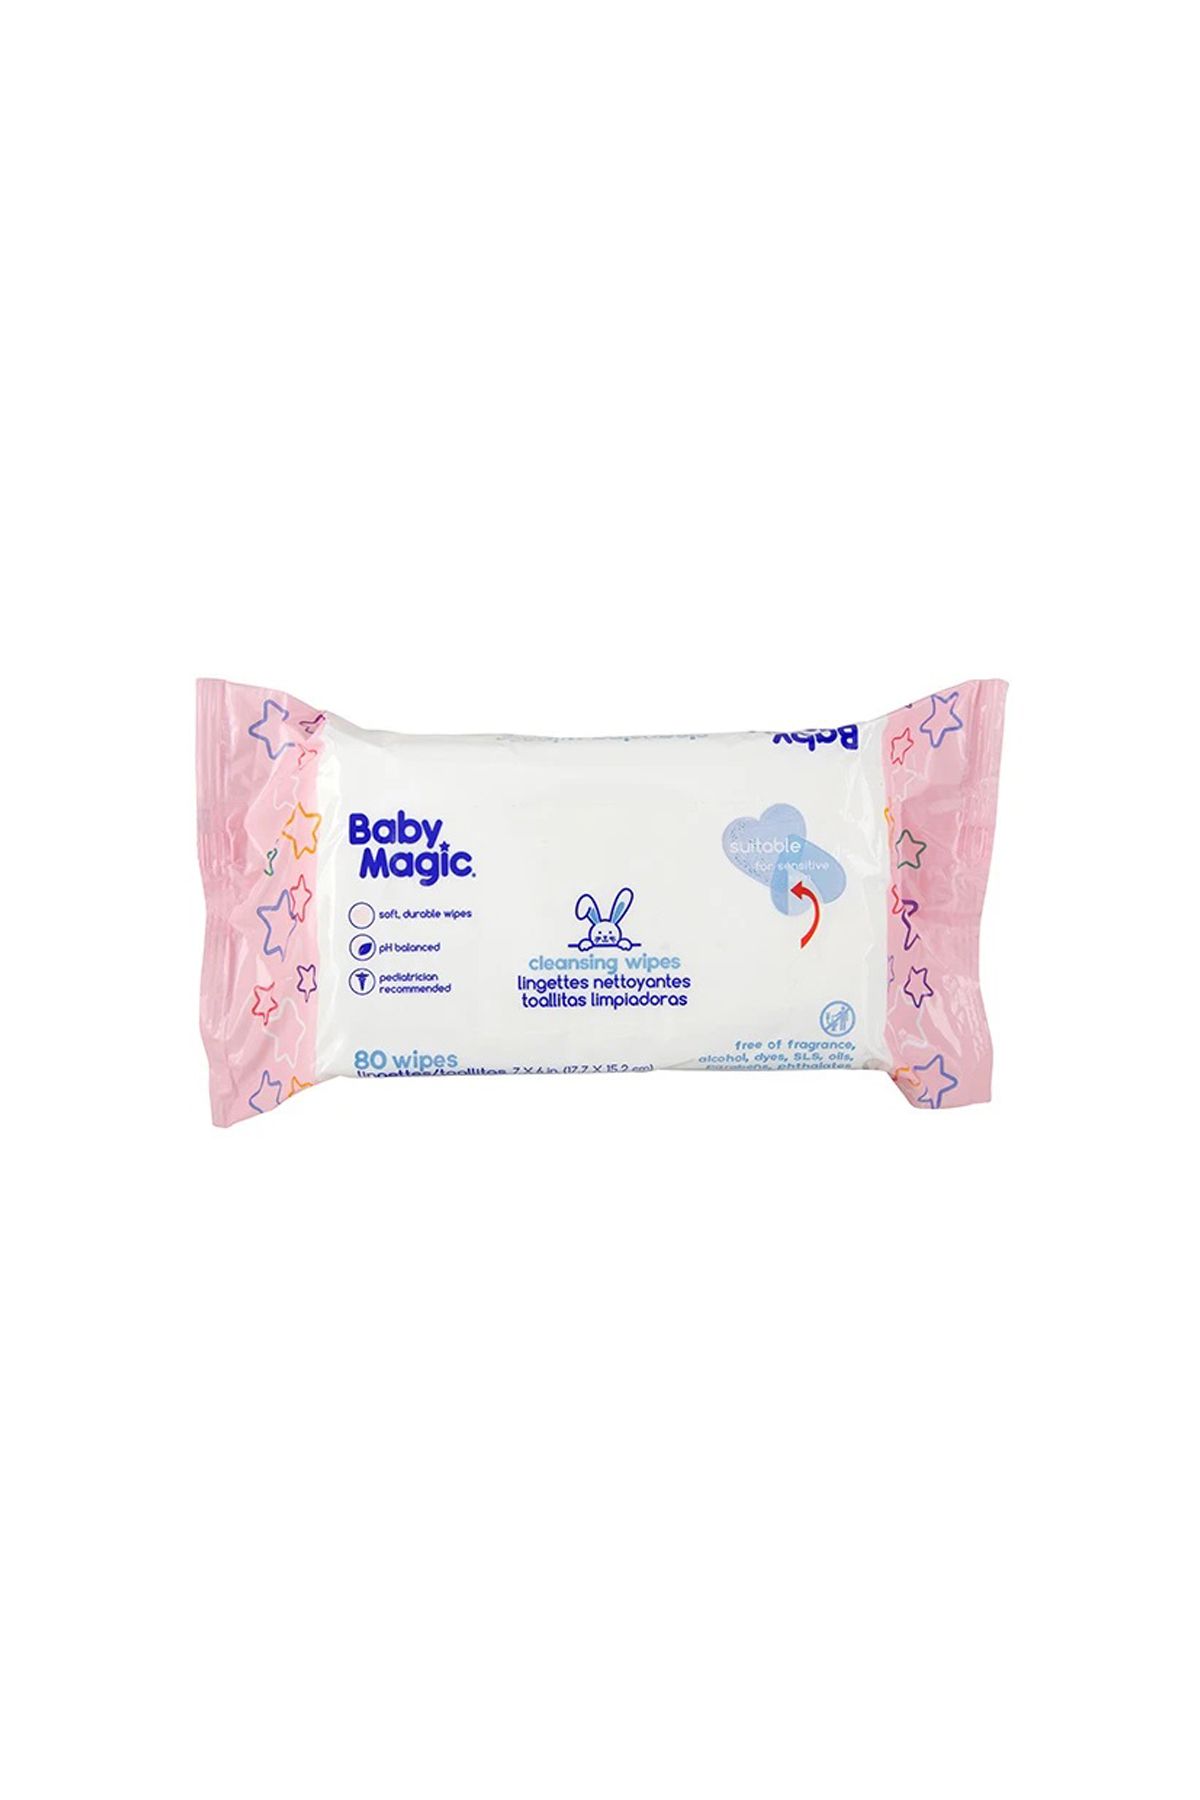 BM - Cleansing Wipes, Unscented 80 Ct